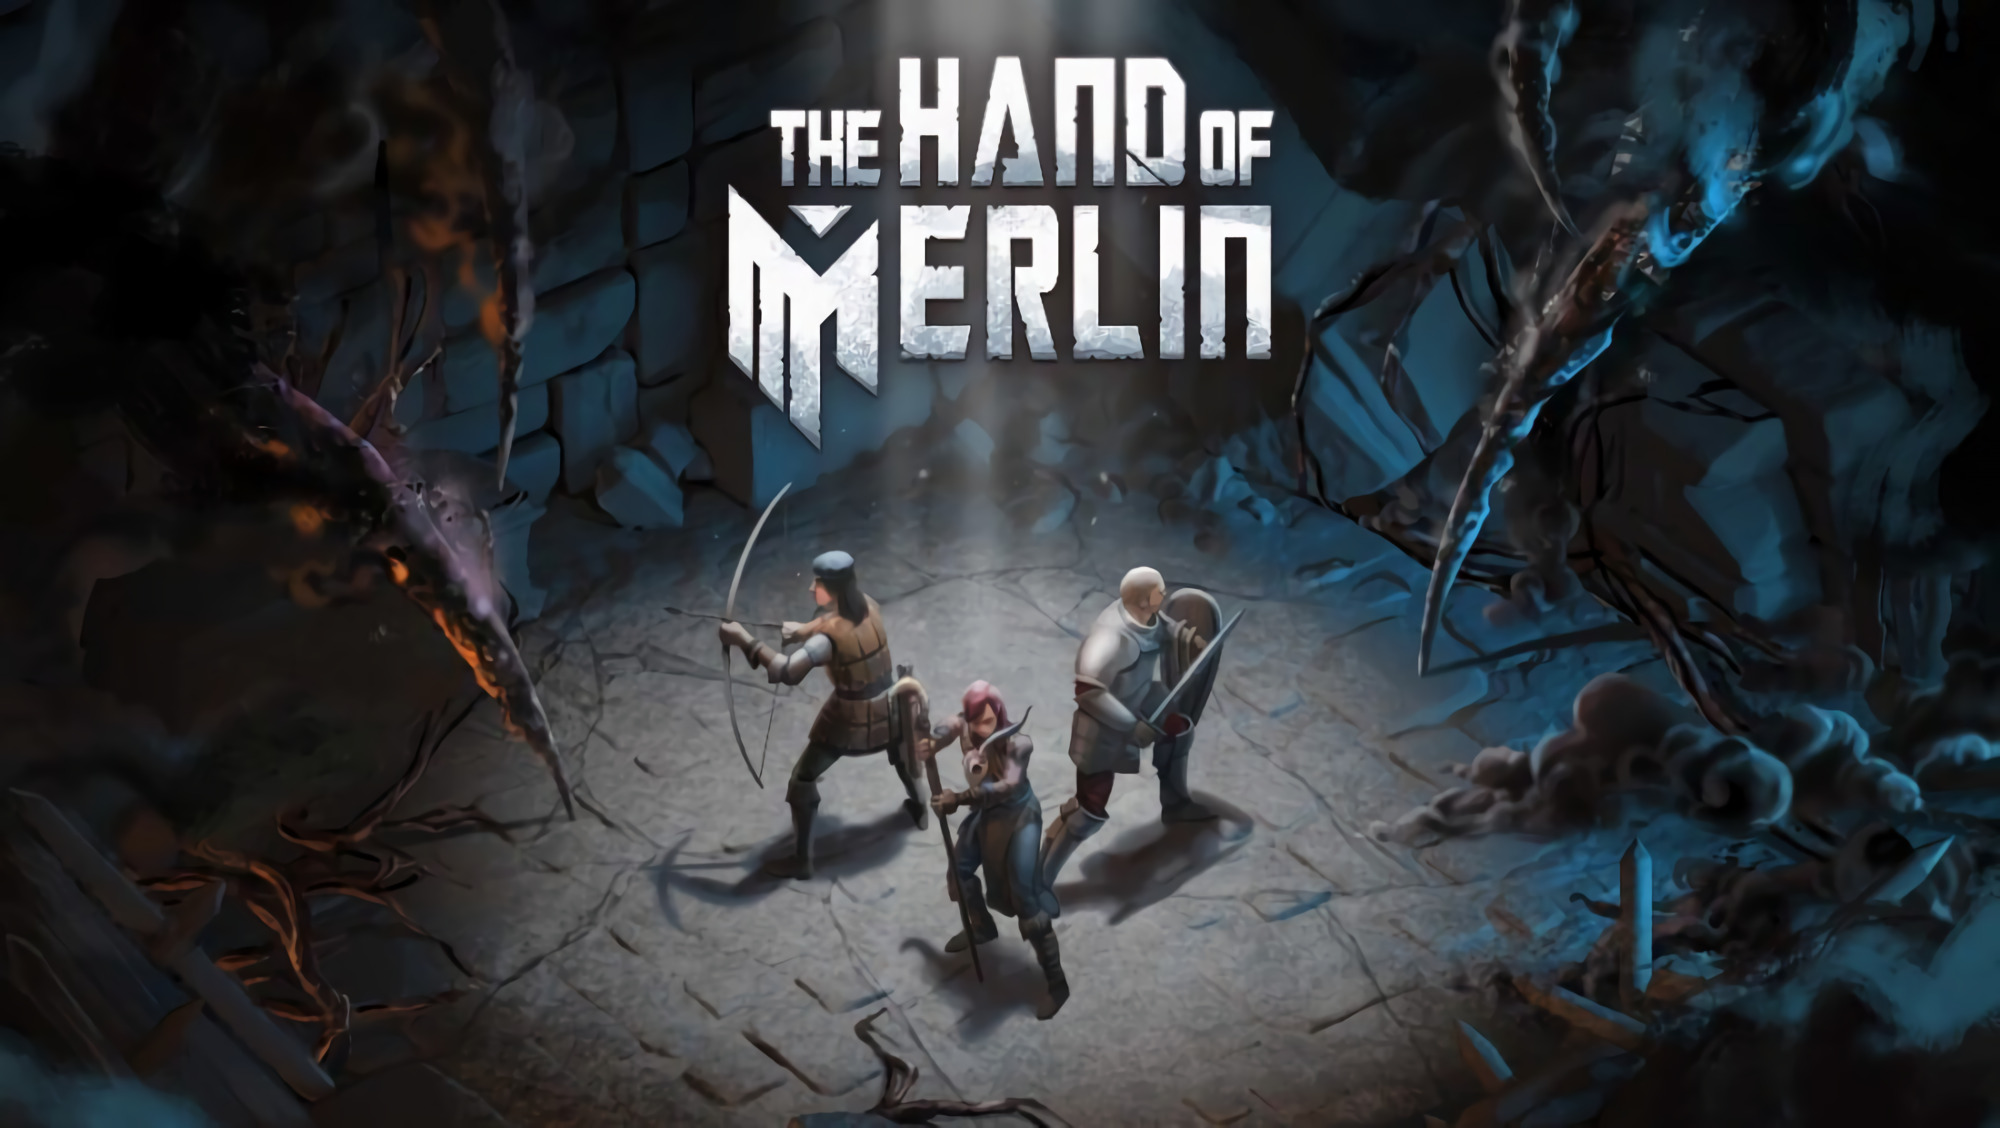 The Hand of Merlin instal the new version for windows